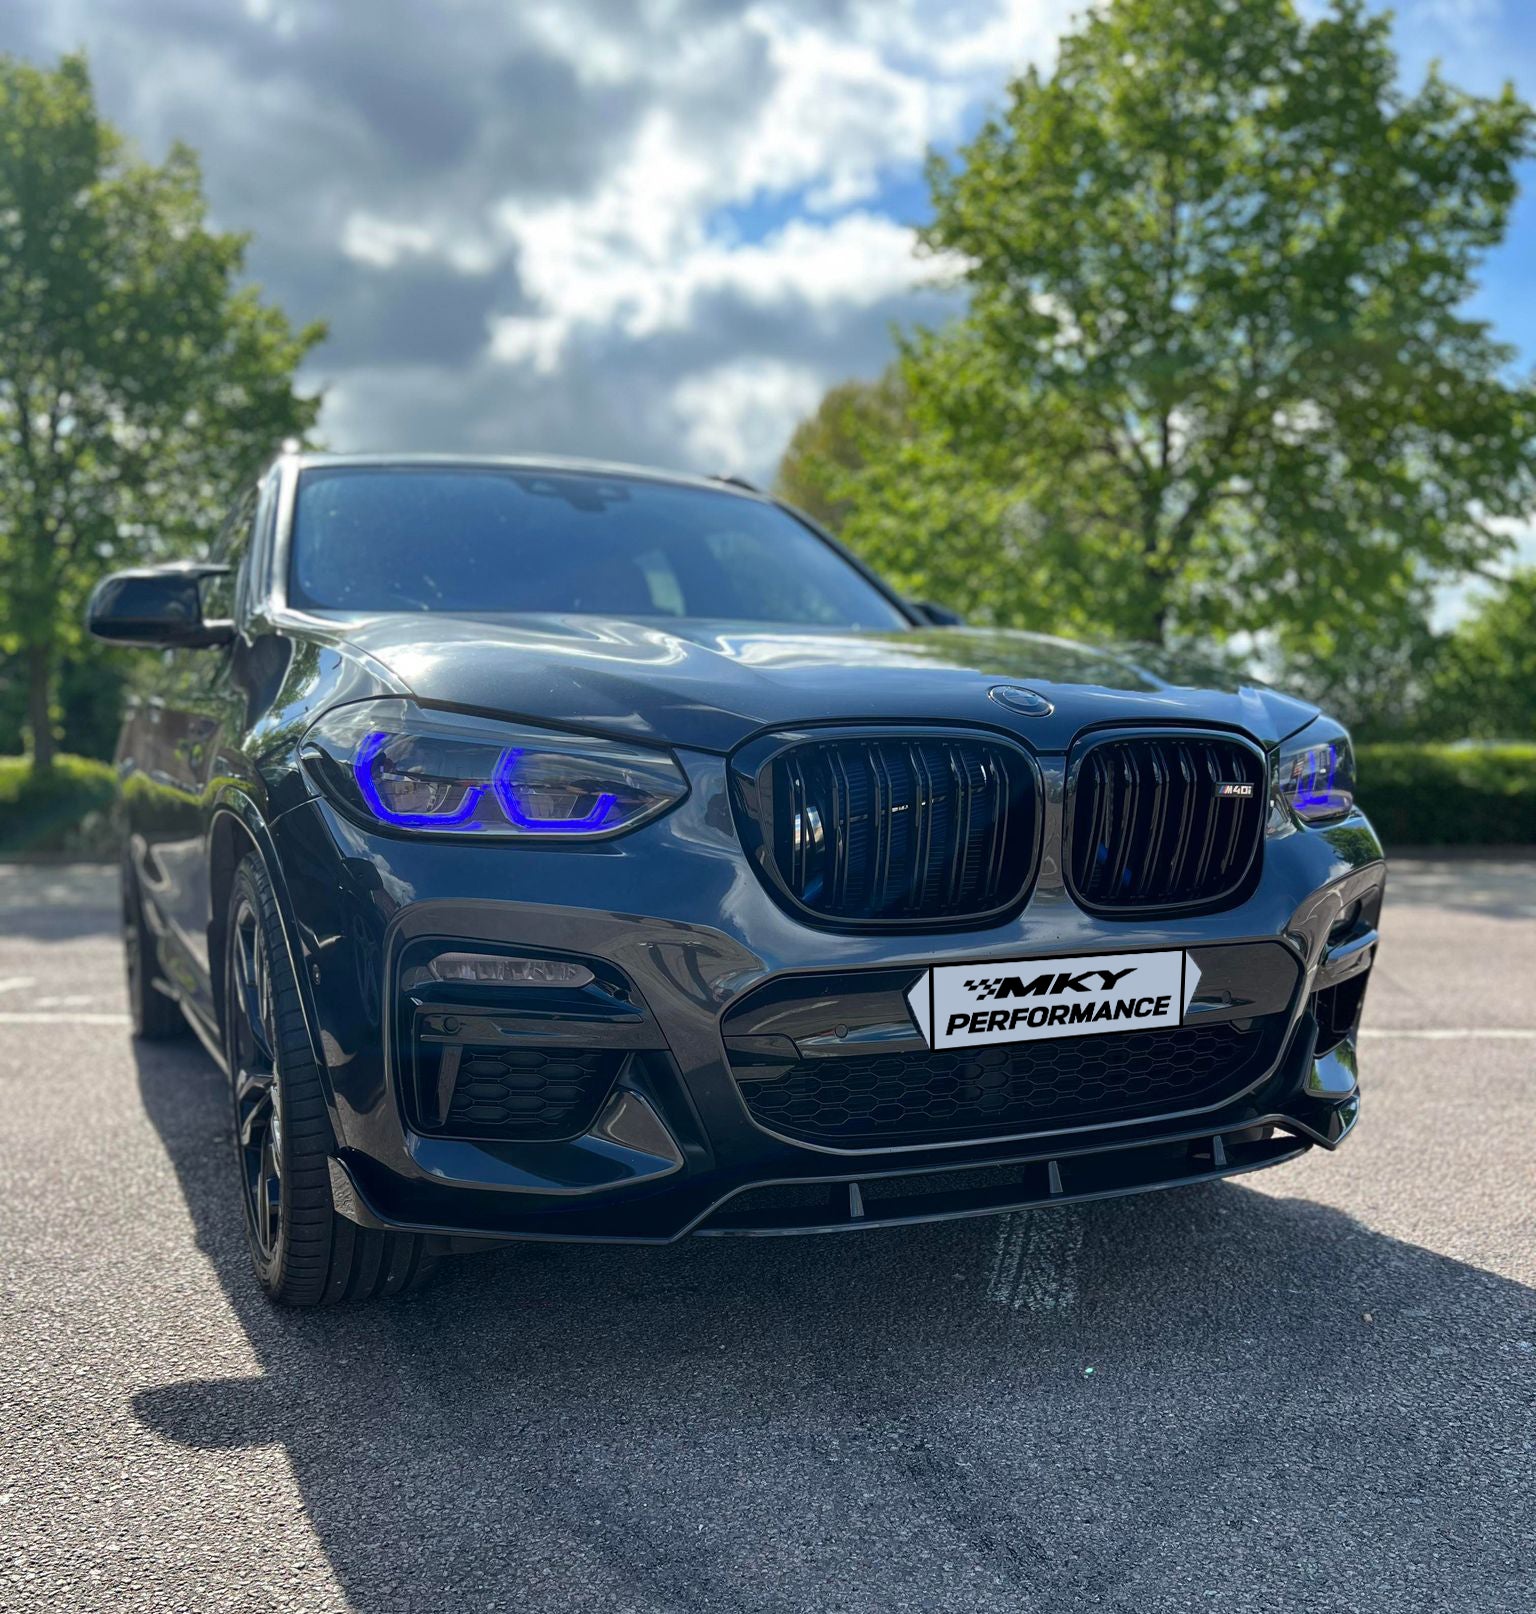 MKY PERFORMANCE X3 / X4 M40i Badge for G01 / G02